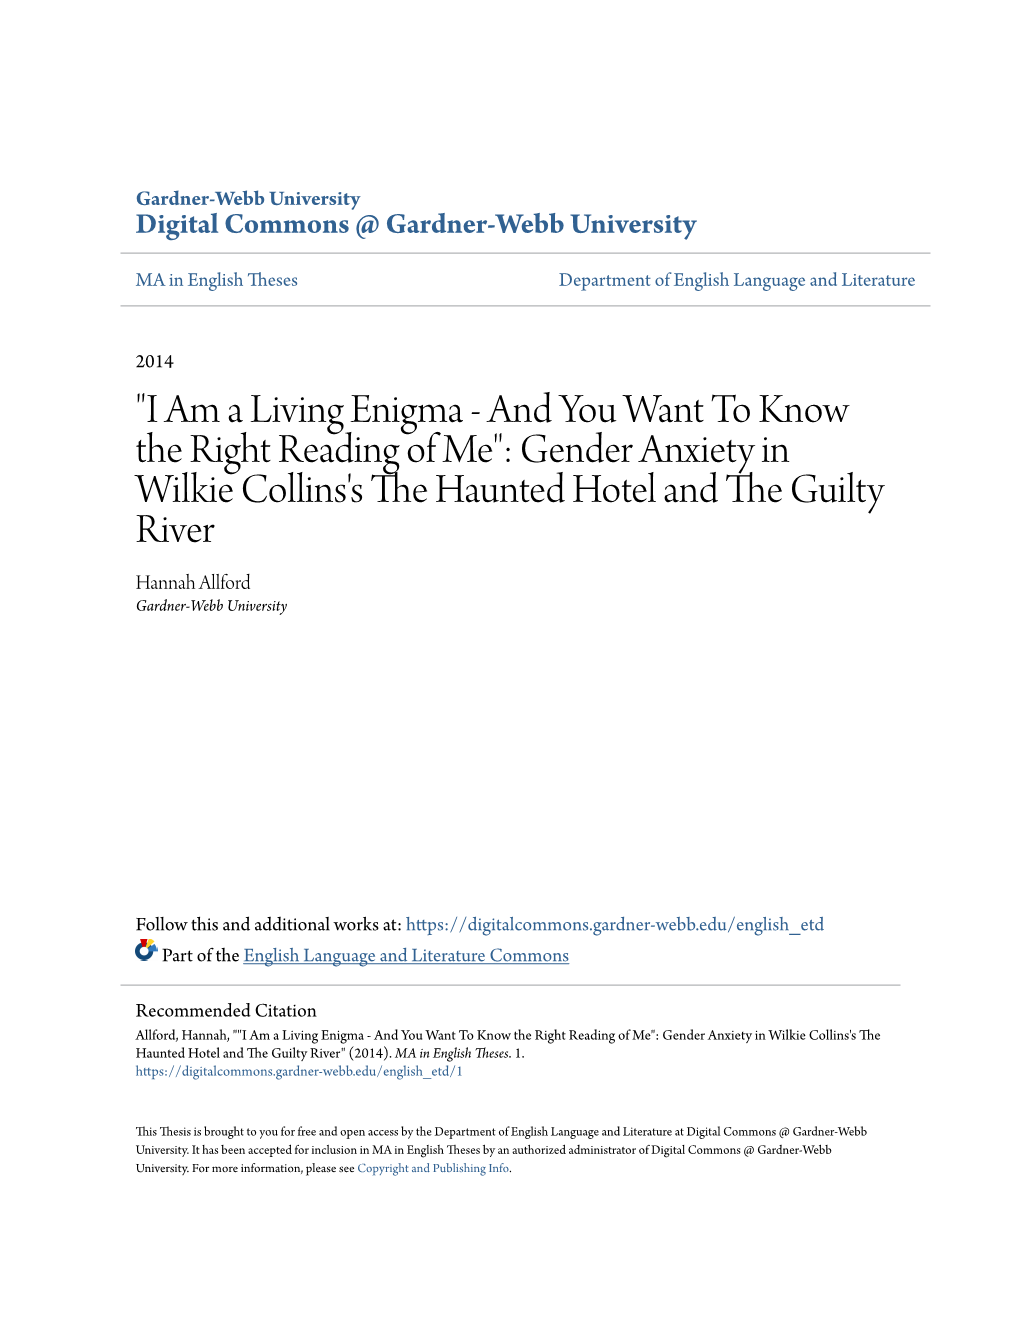 Gender Anxiety in Wilkie Collins's the Haunted Hotel and the Uig Lty River" (2014)